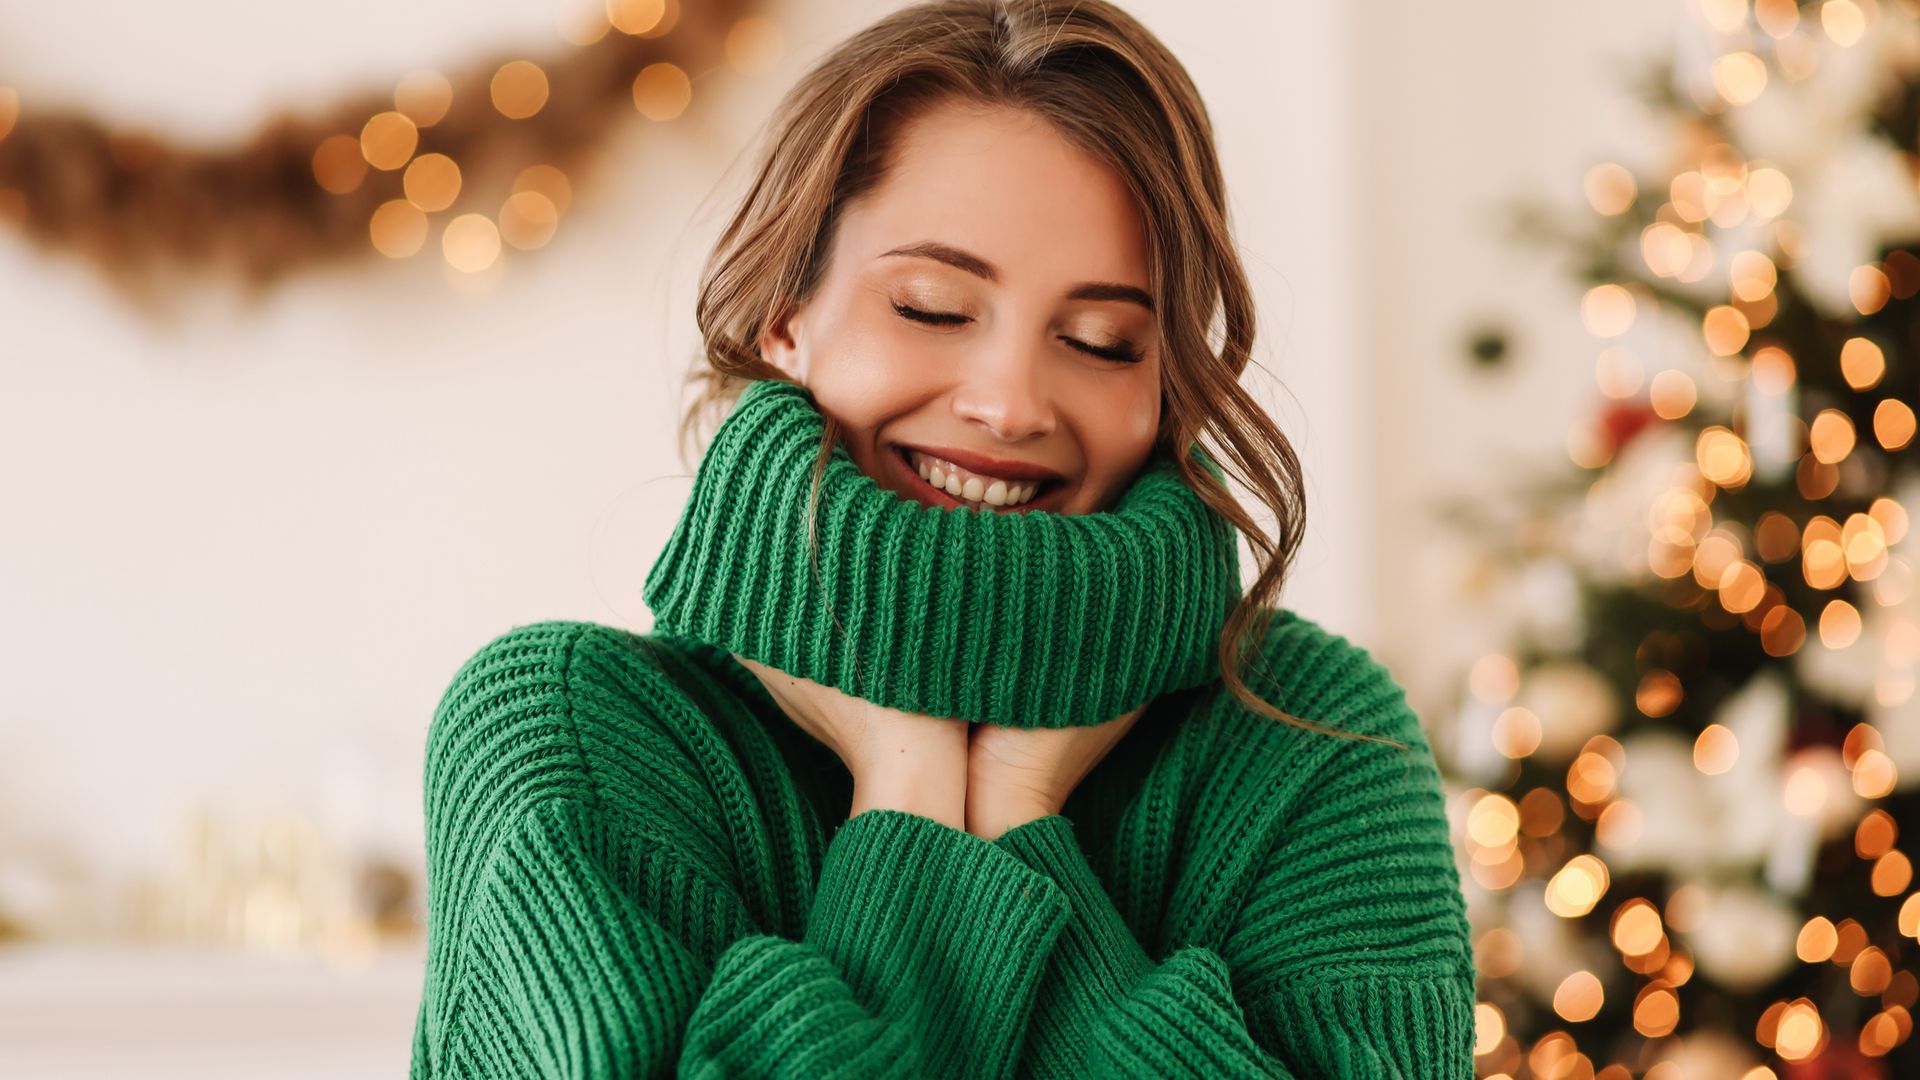 Portrait of a funny emotional cheerful young woman with horns on her head in a green cozy warm sweater laughing having fun holding and eating a lollipop and ginger cookies on Christmas day on the background of a decorated Christmas tree at home in winter on New Year's Eve